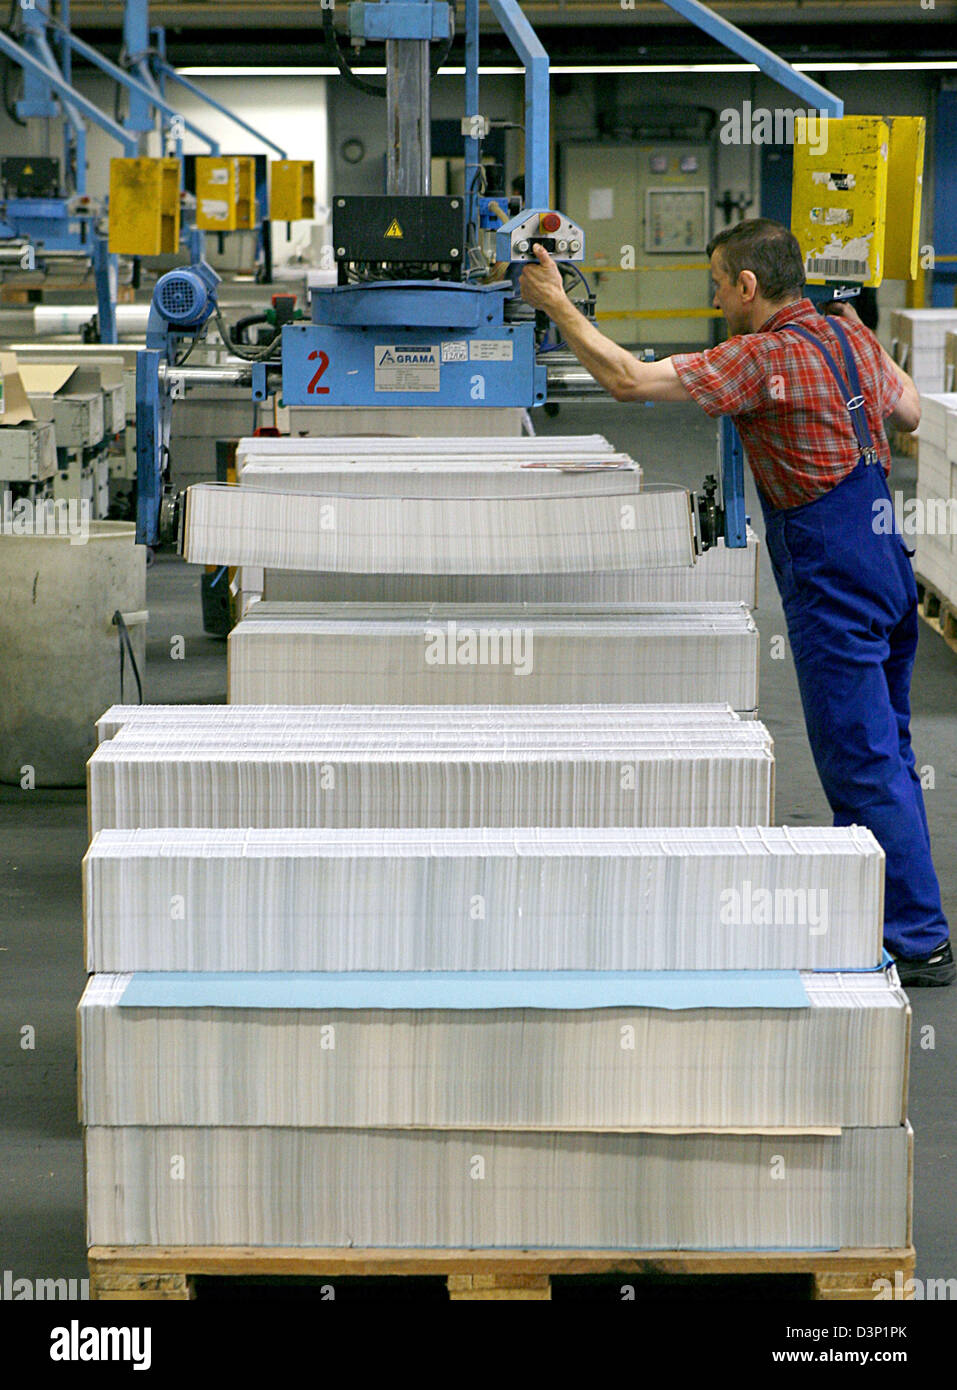 A worker puts packed printed sheets into a glue binding machine in the Prinovis printing plant in Nuremberg, Germany, 27 June 2006. Prinovis is a joint-venture of publishing companies Bertelsmann, Gruner&Jahr and Springer and one of Europe's biggest rotogravure printing companies. Photo: Daniel Karmann Stock Photo